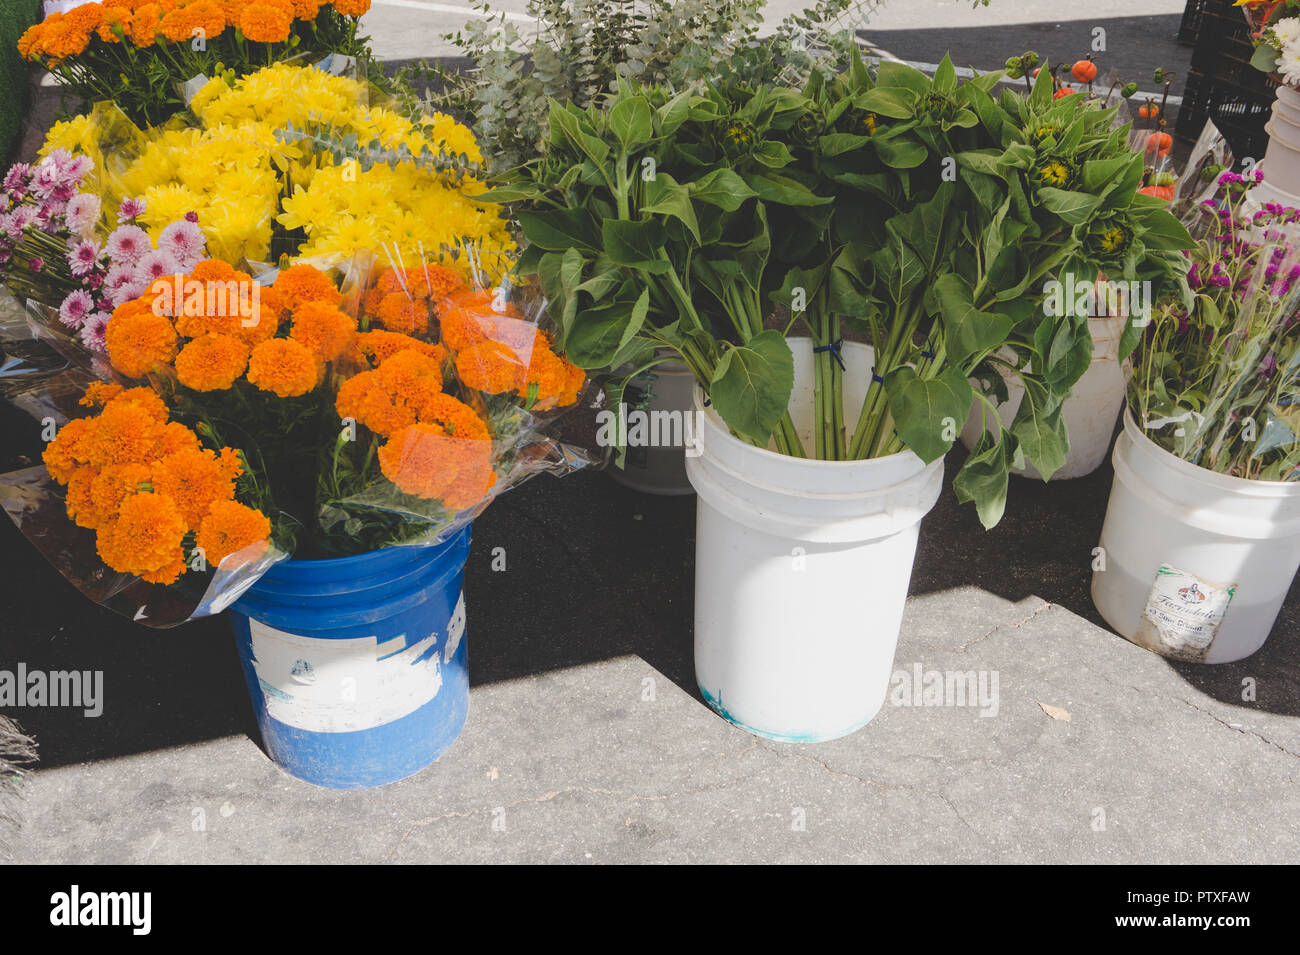 Southern California flower stand at Farmers market: Gorgeous flowers for sale on display in white buckets, natural light. Stock Photo